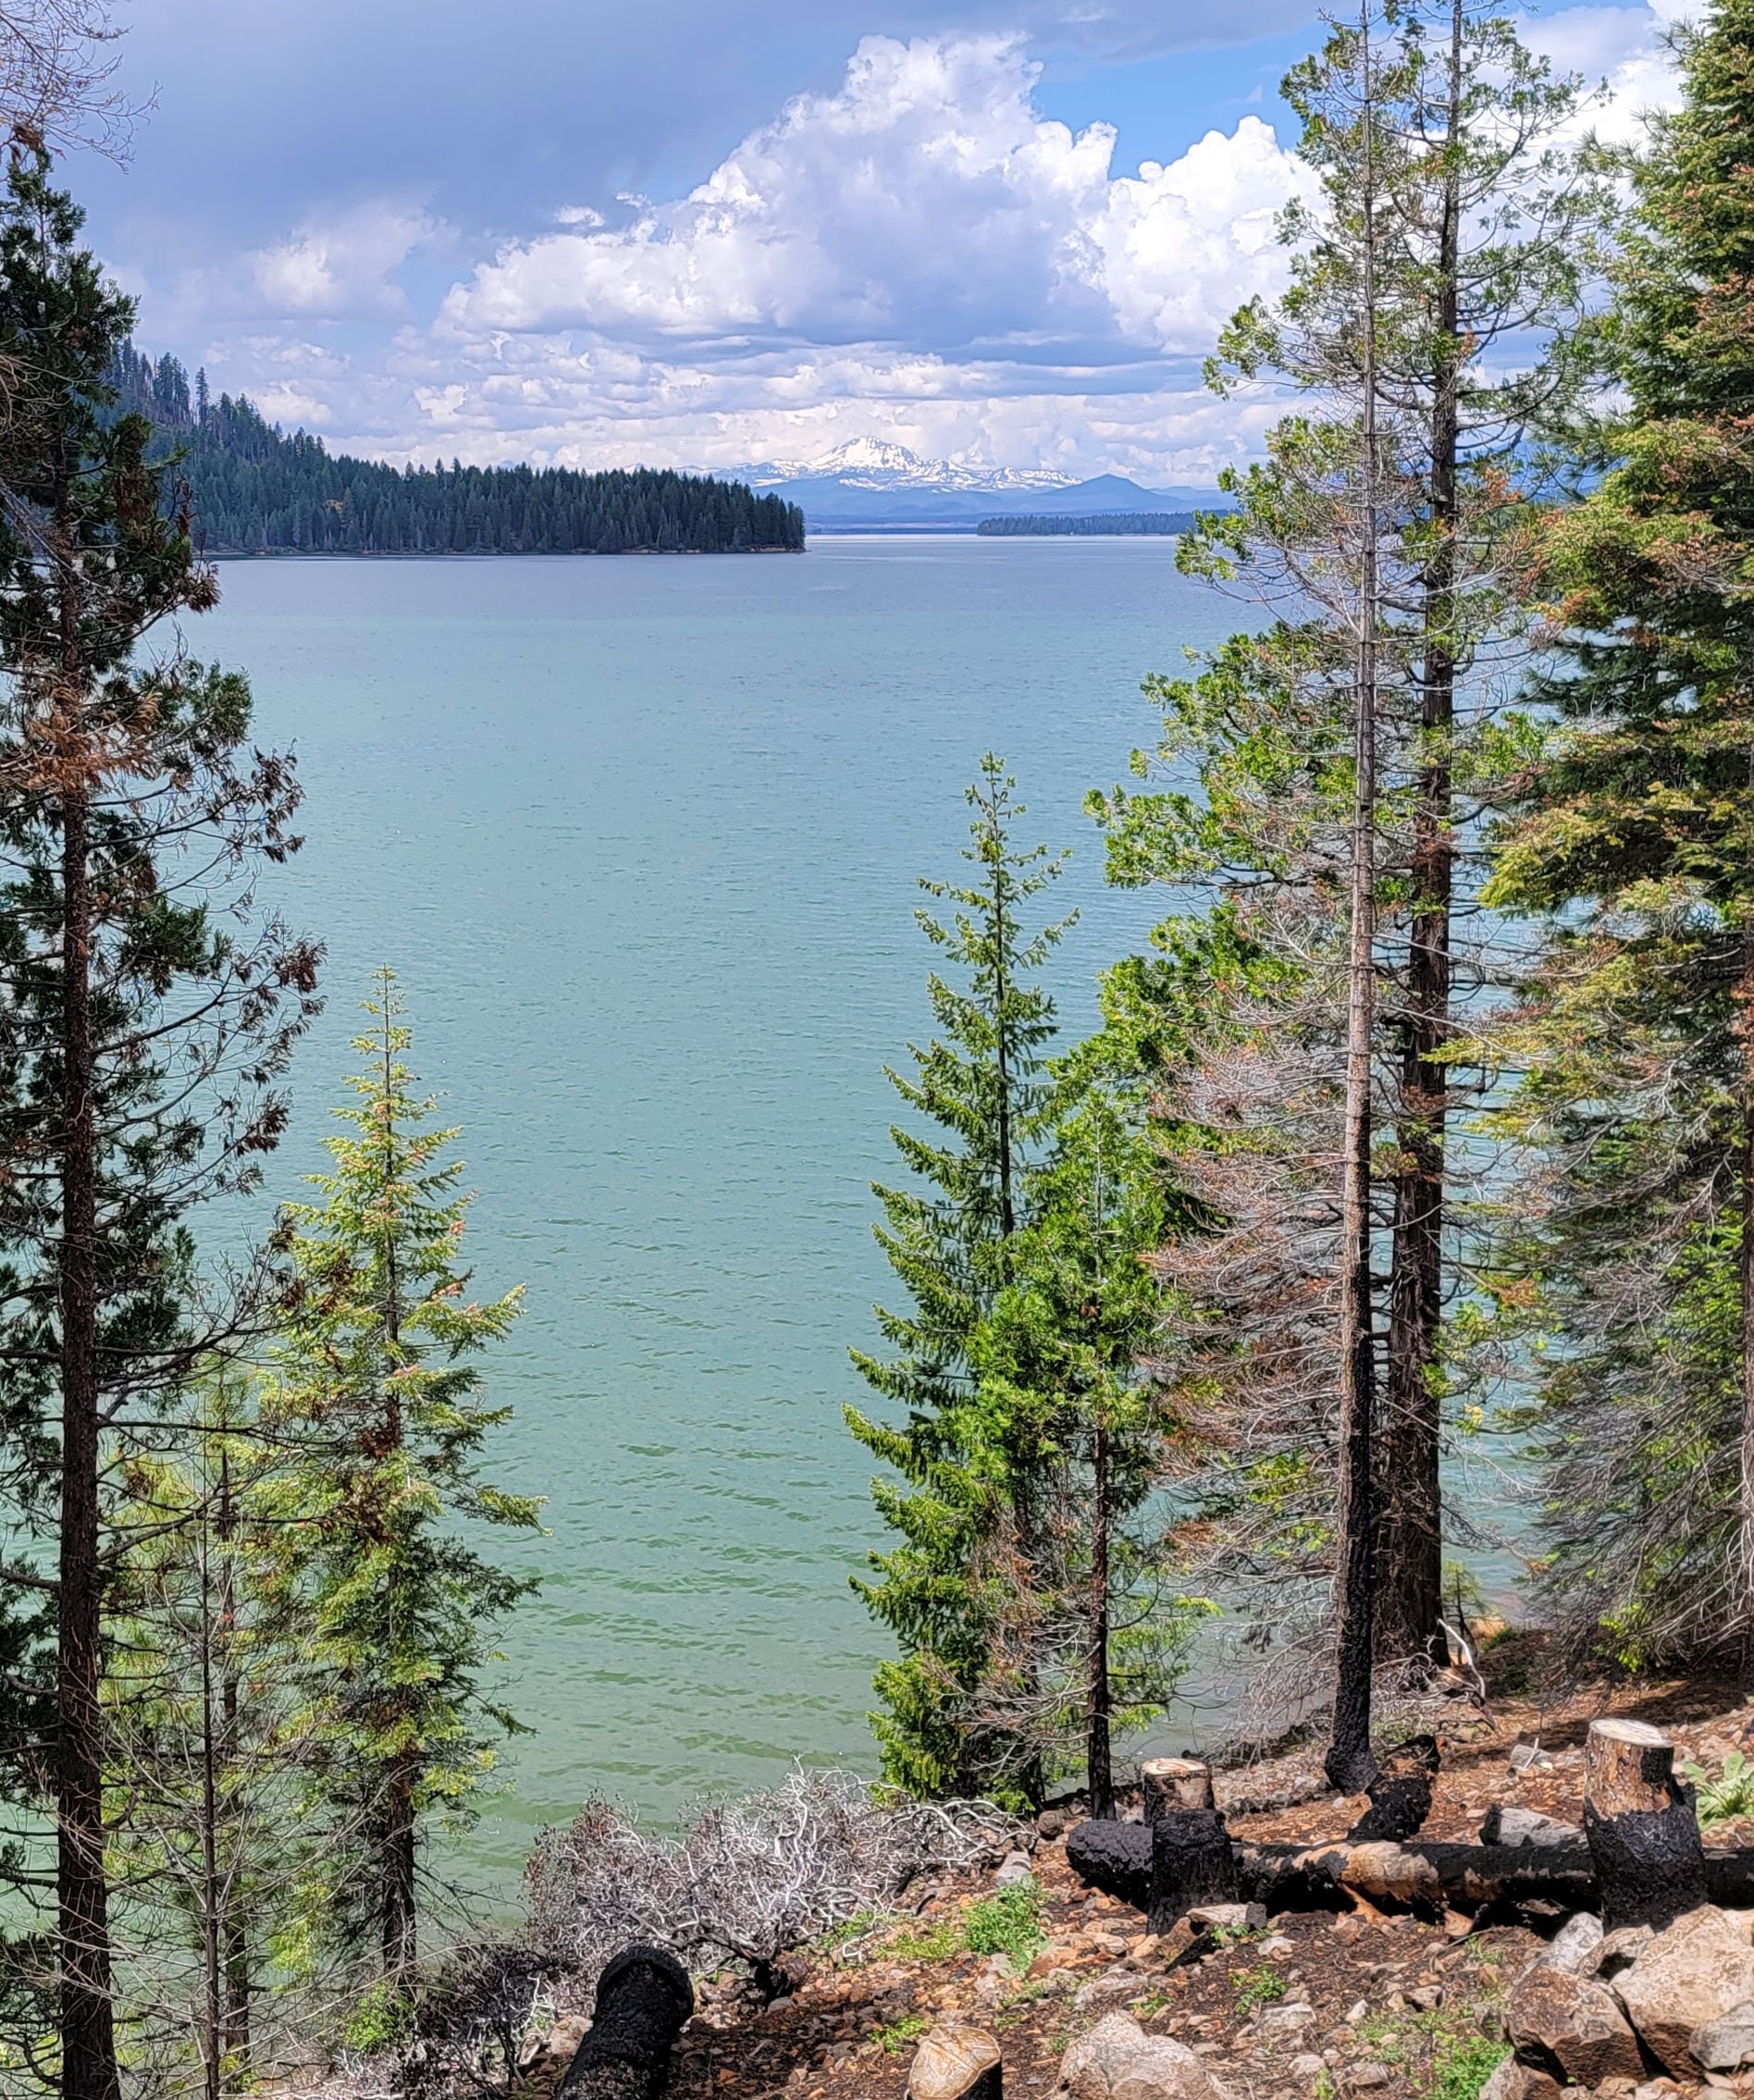 Lake Almanor, about 3 hours from Lake Tahoe. Got a little bit of Lake Louise vibes going on.